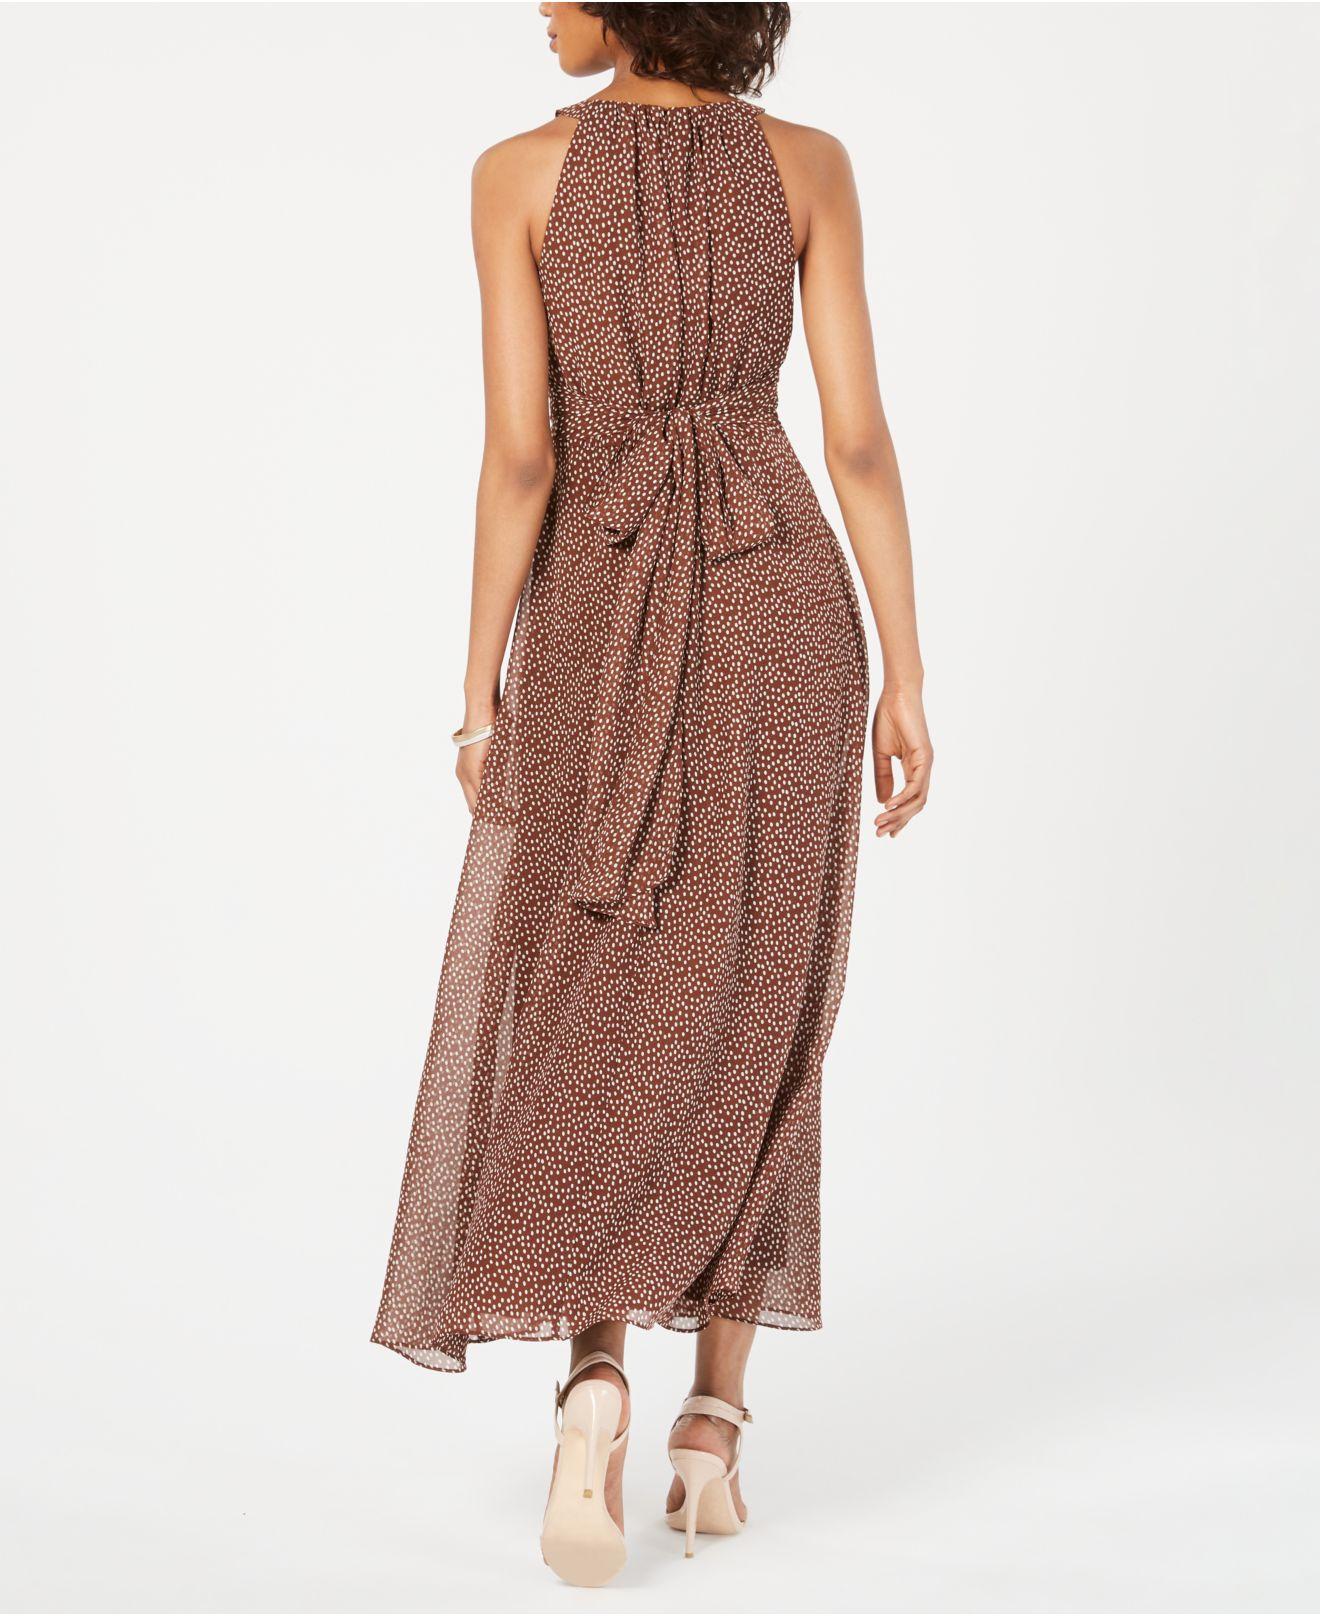 Adrianna Papell Synthetic Darling Dot Midi Dress in Brown/Ivory (Brown) |  Lyst